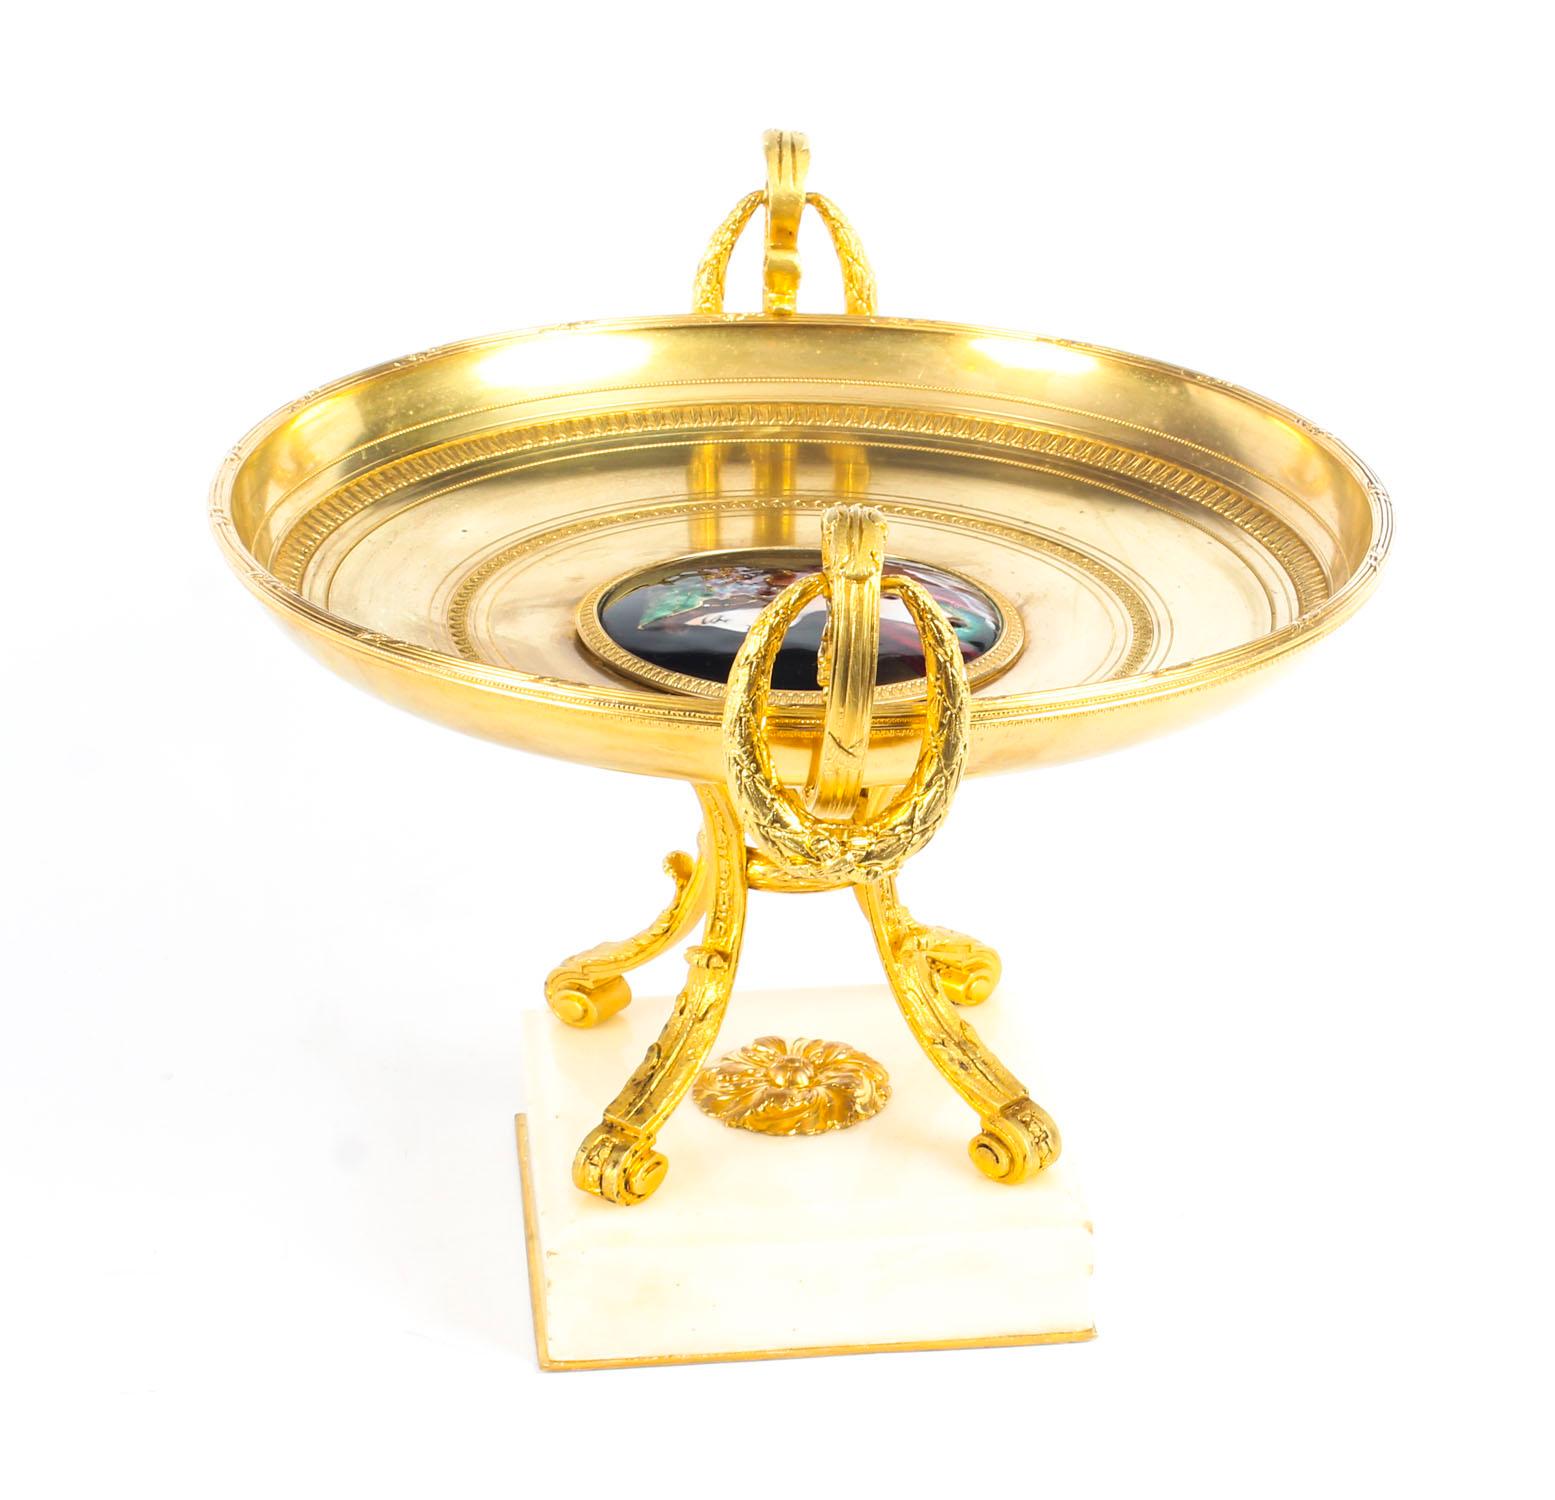 Antique French Ormolu Tazza with Limoges Enamel Plaque, 19th Century For Sale 4